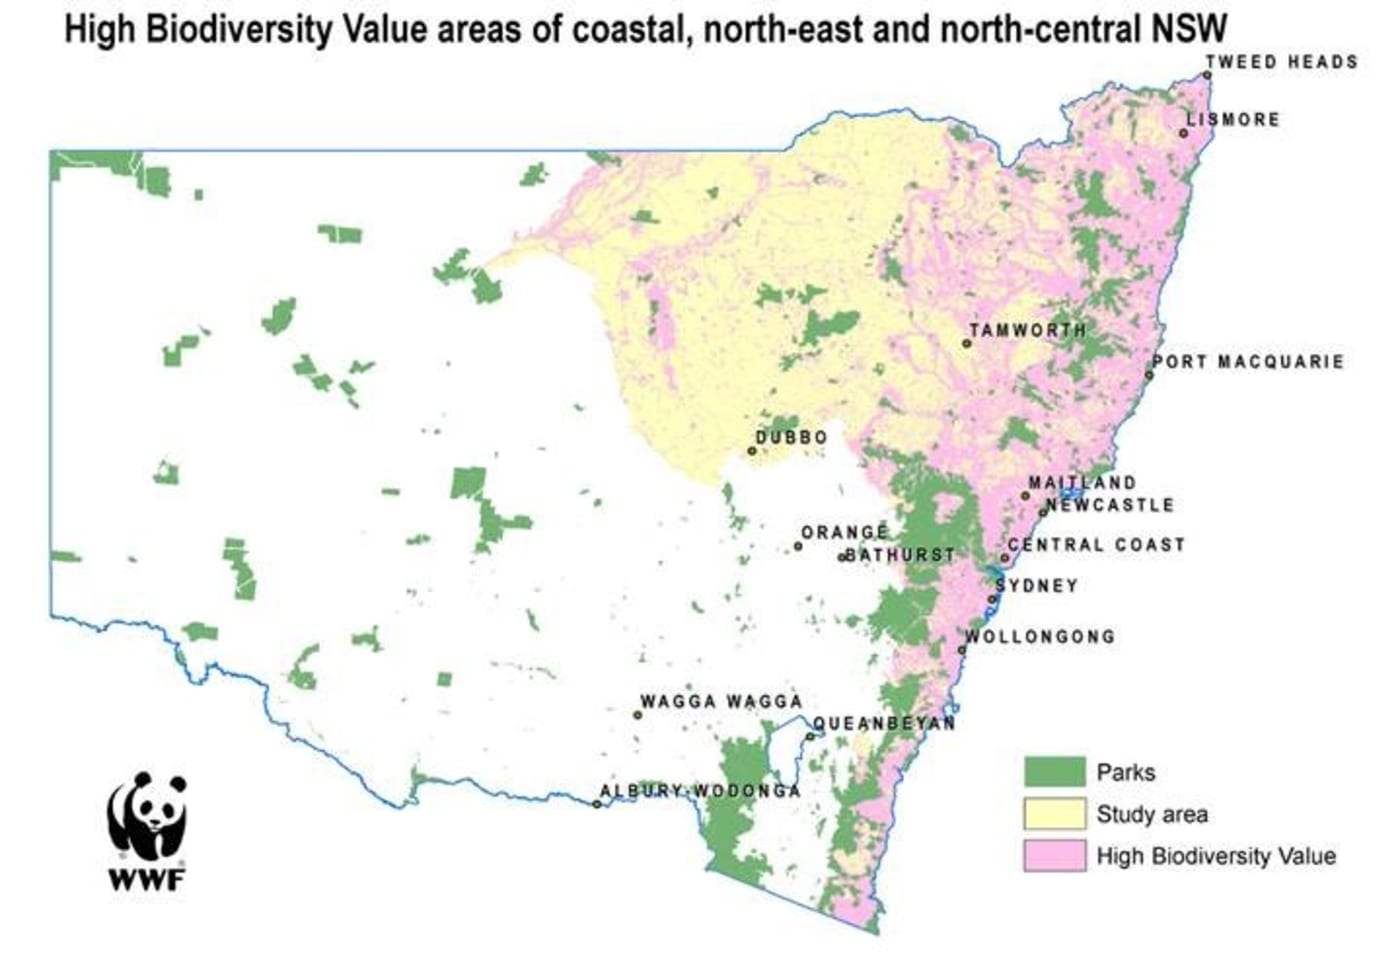 High Biodviersity areas of coastal, north-east and north-central NSW